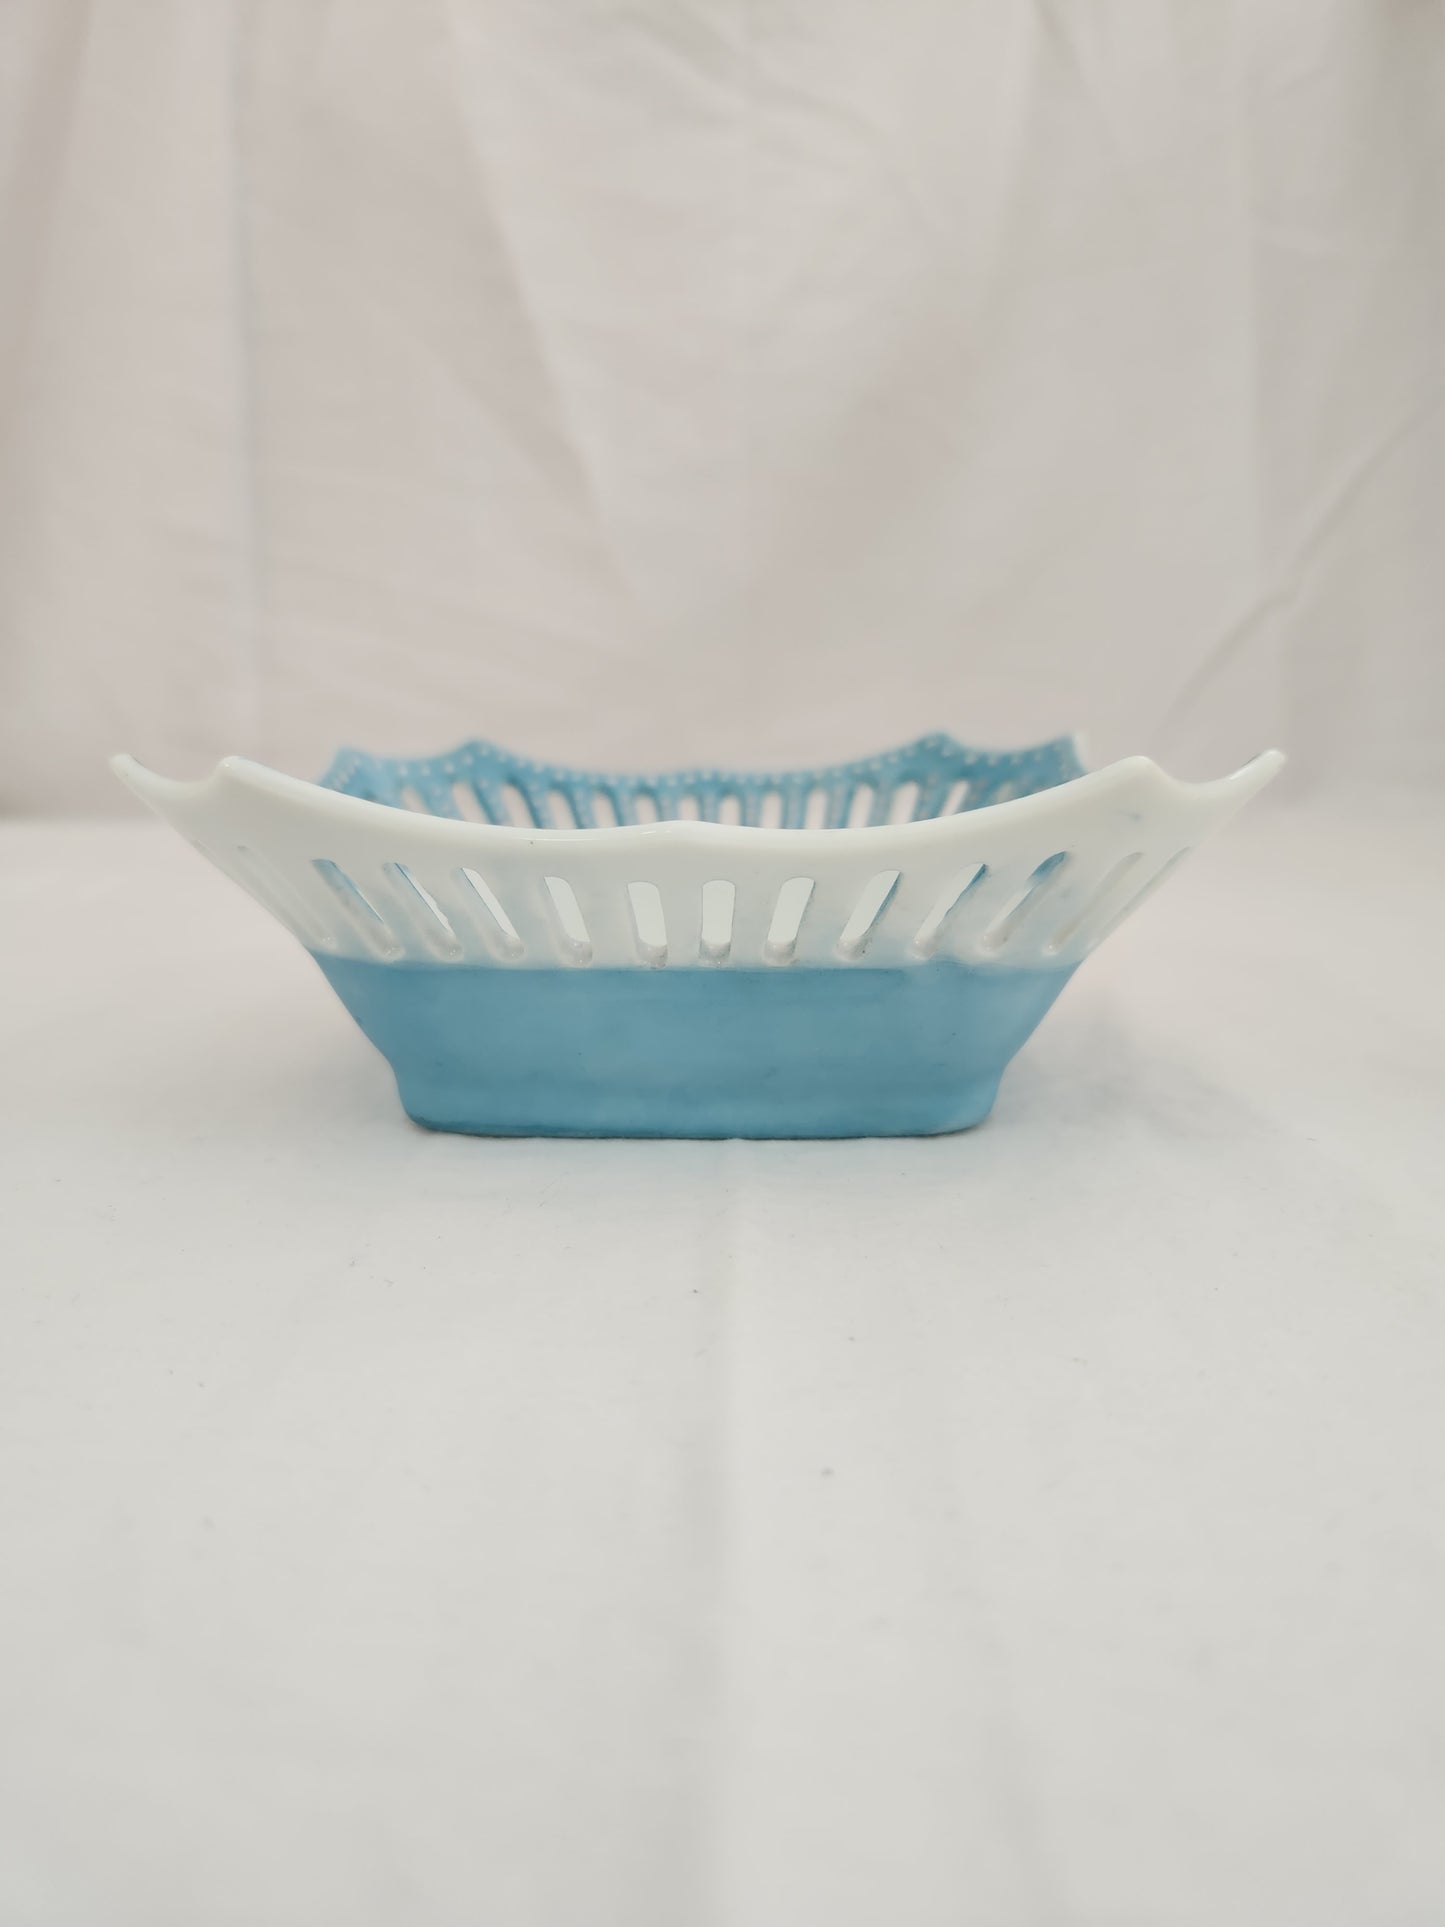 Square Reticulated Light Blue 5-1/2" Trinket/Candy Dish (signed)